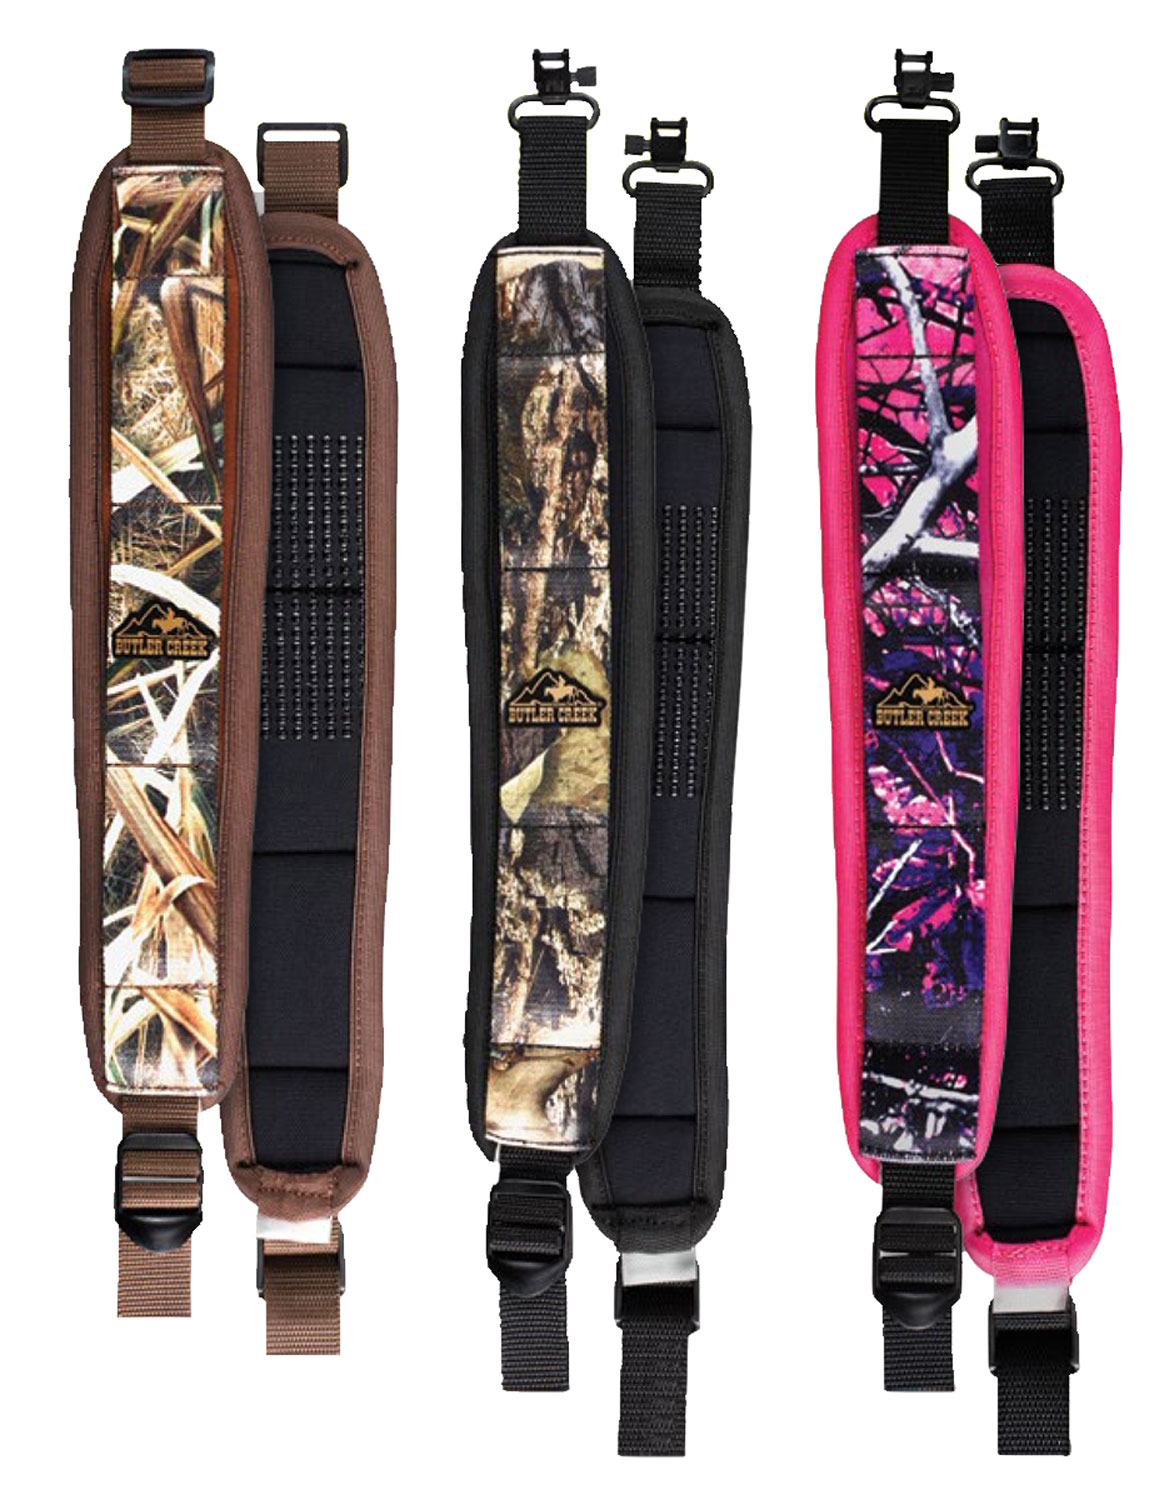 Butler Creek 181019 Comfort Stretch Sling made of Realtree Xtra Neoprene with Non-Slip Grippers,  Adjustable Design & QD Swivels for Rifles